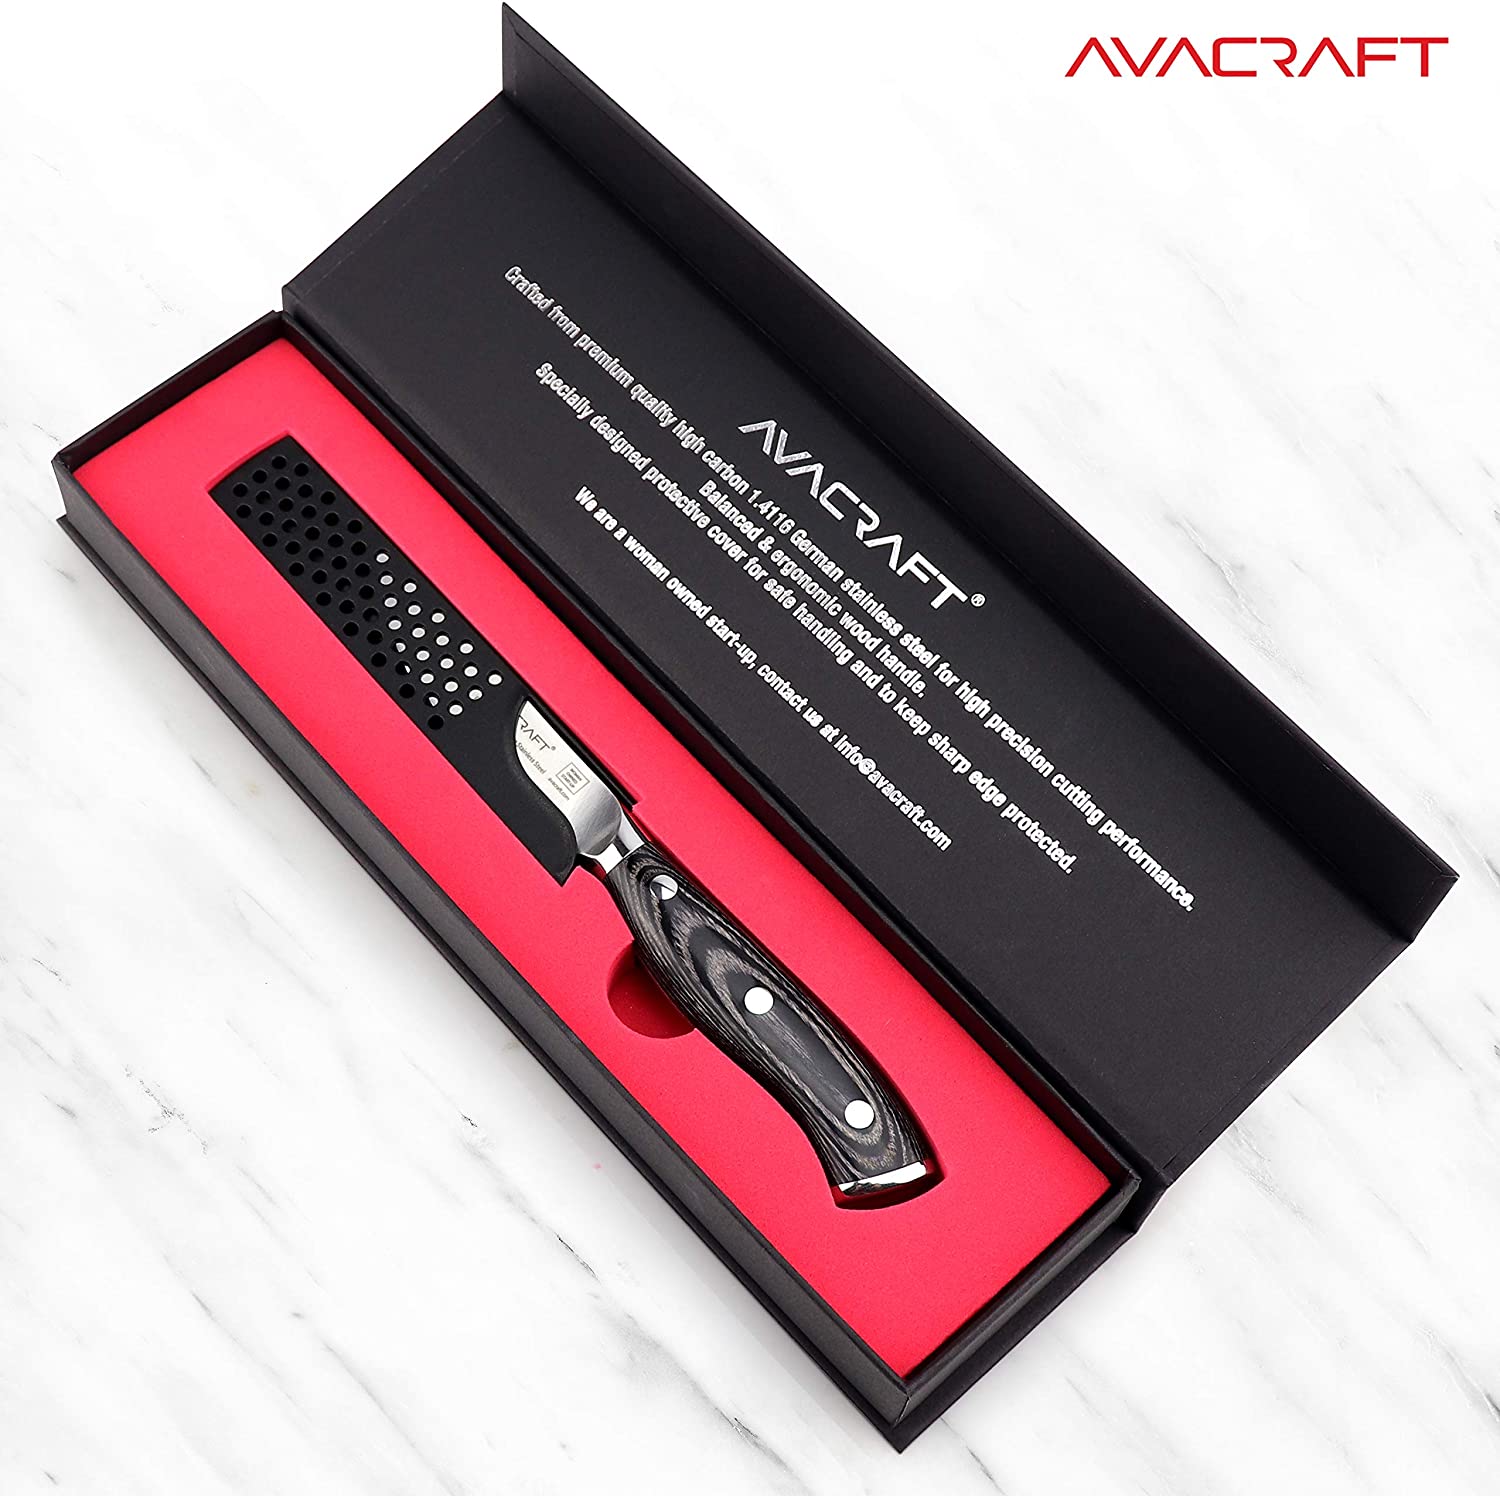 Chef Knife - Kitchen Knives, 8 inch Chef's Knife, 4 inch Paring Knife, High  Carbon Stainless Steel with Ergonomic Handle